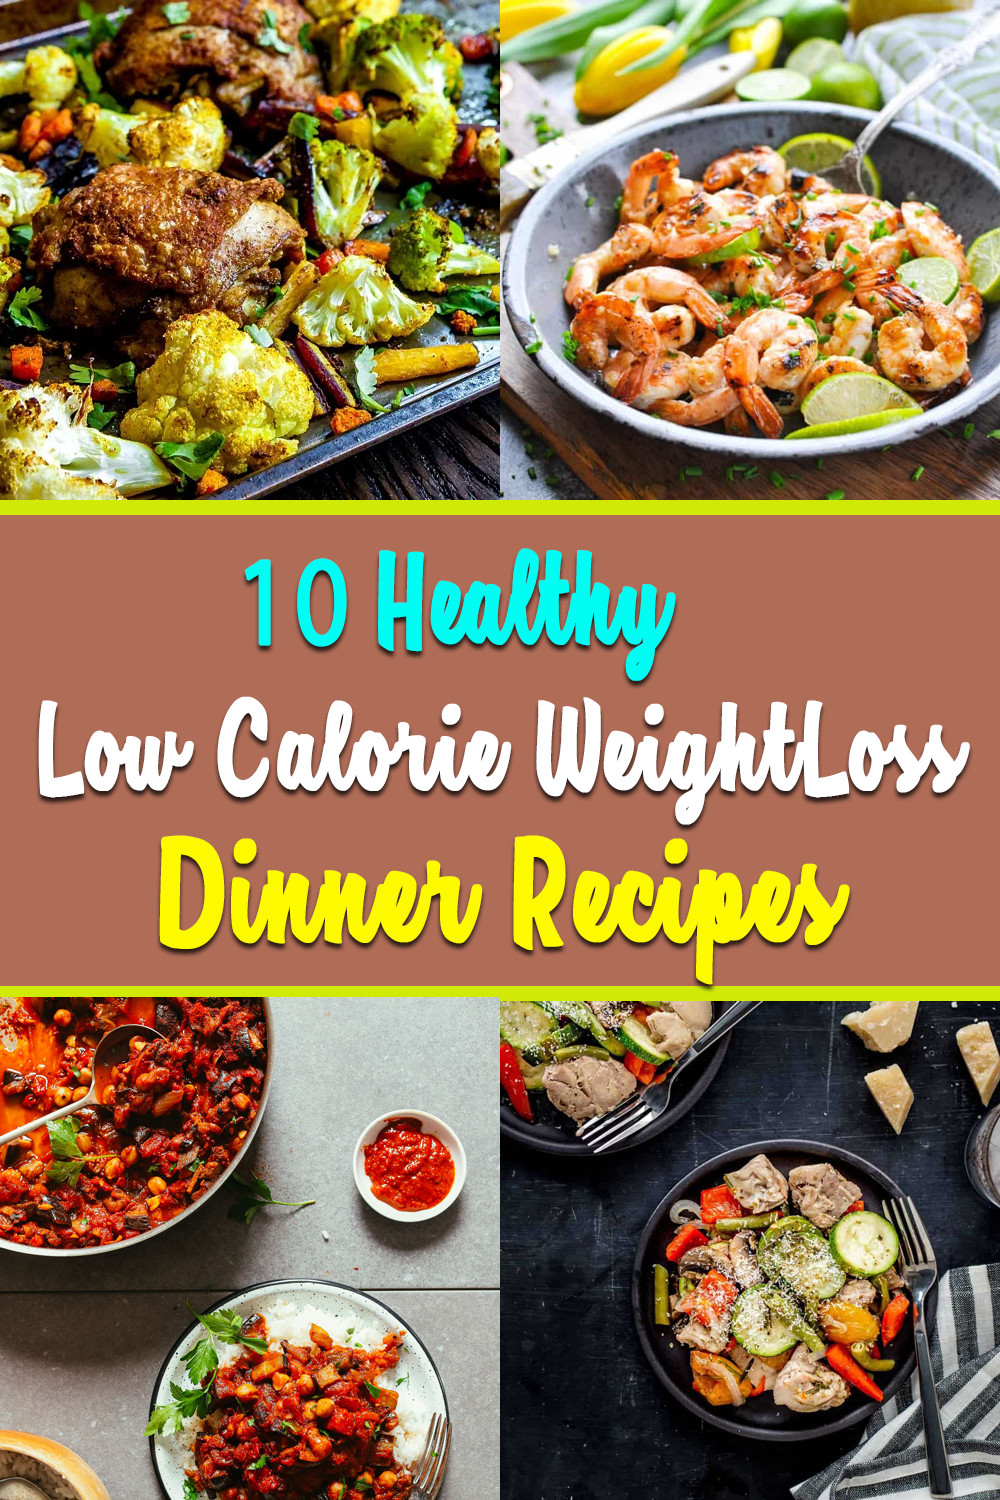 Light Dinner Recipes For Weight Loss
 Pin on Healthy Eating Recipes